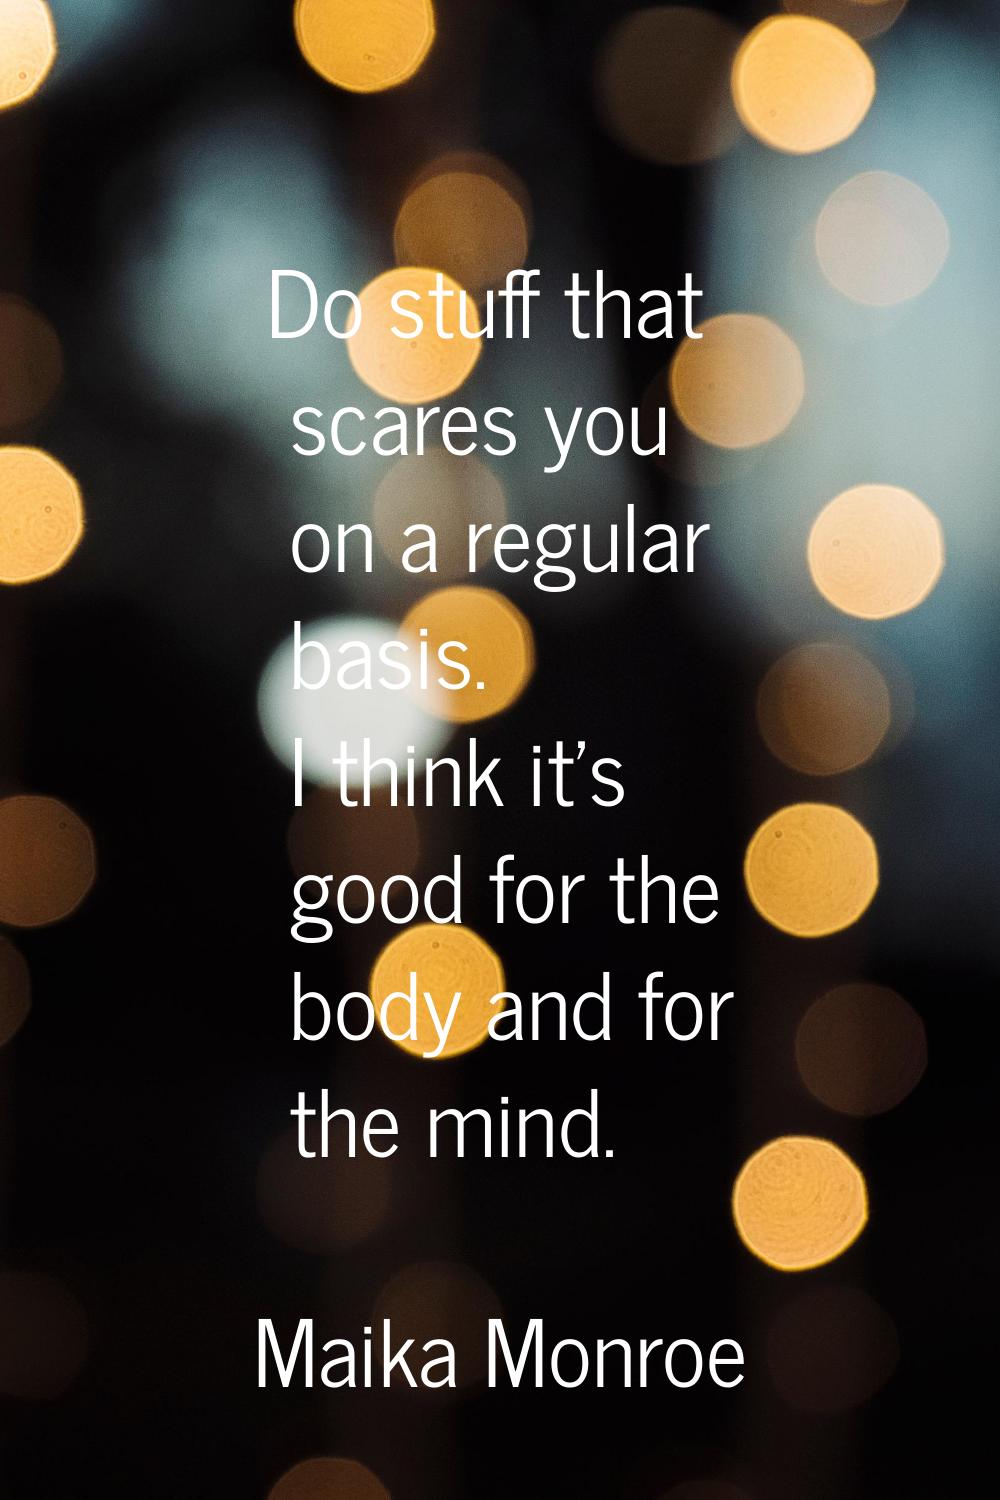 Do stuff that scares you on a regular basis. I think it's good for the body and for the mind.